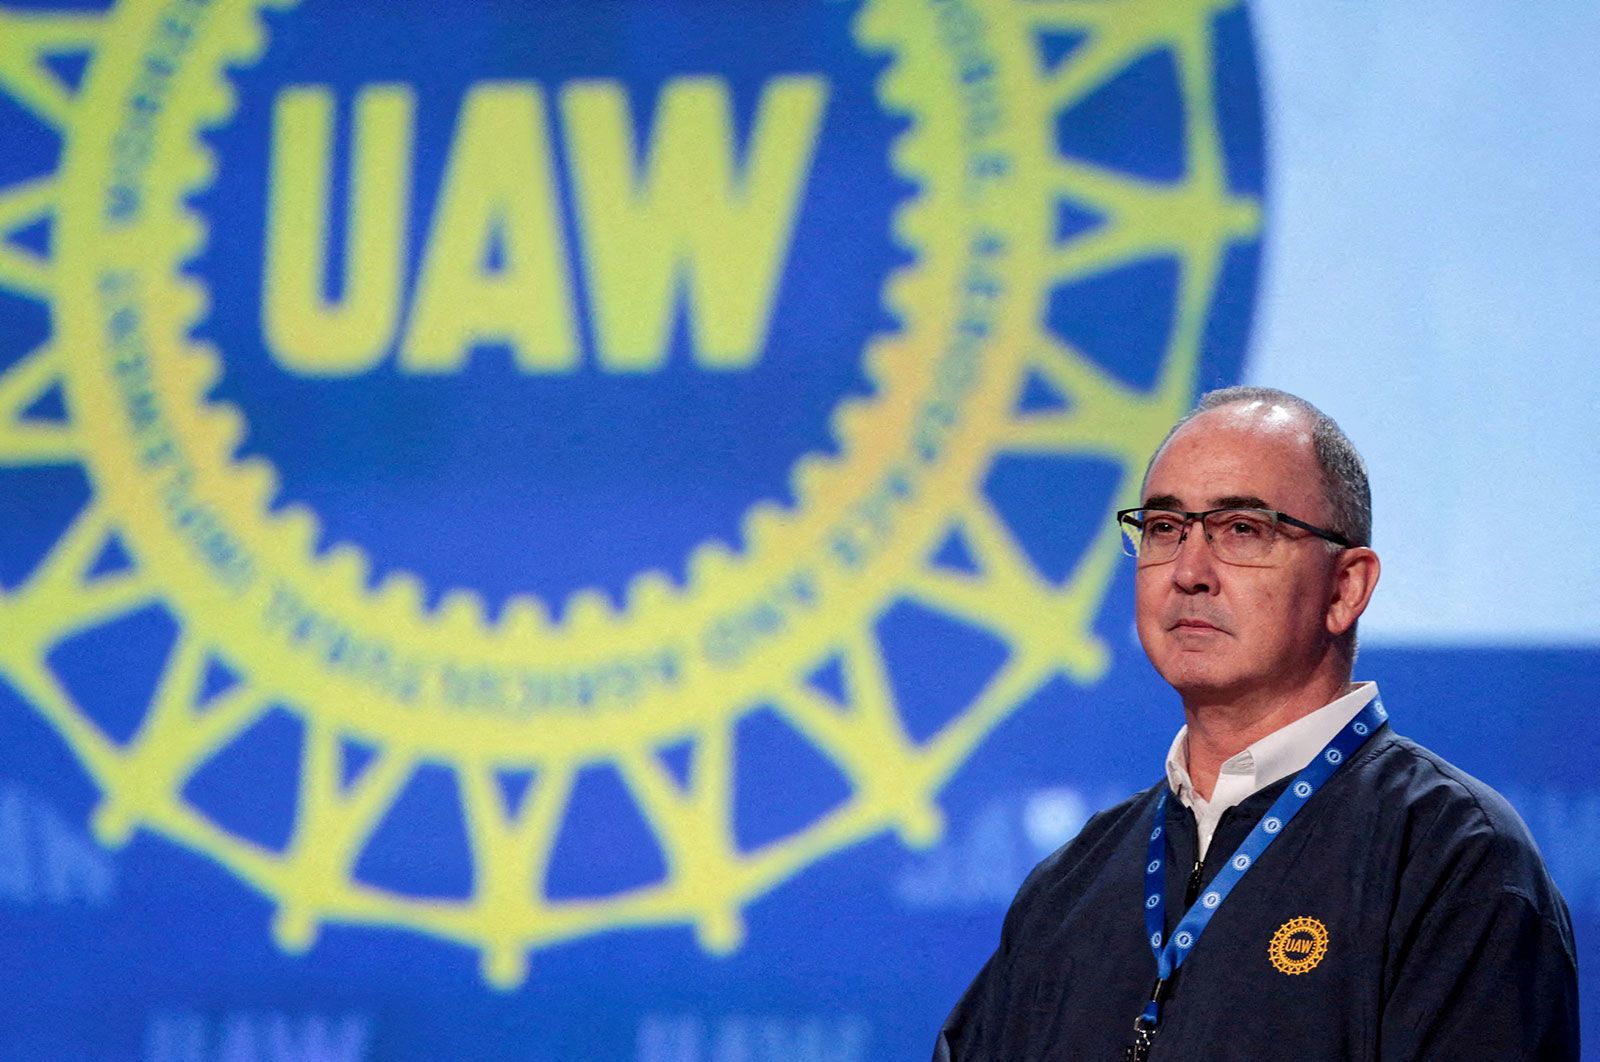 UAW and Automakers Face Delays in Talks as Biden Administration Plans Intervention